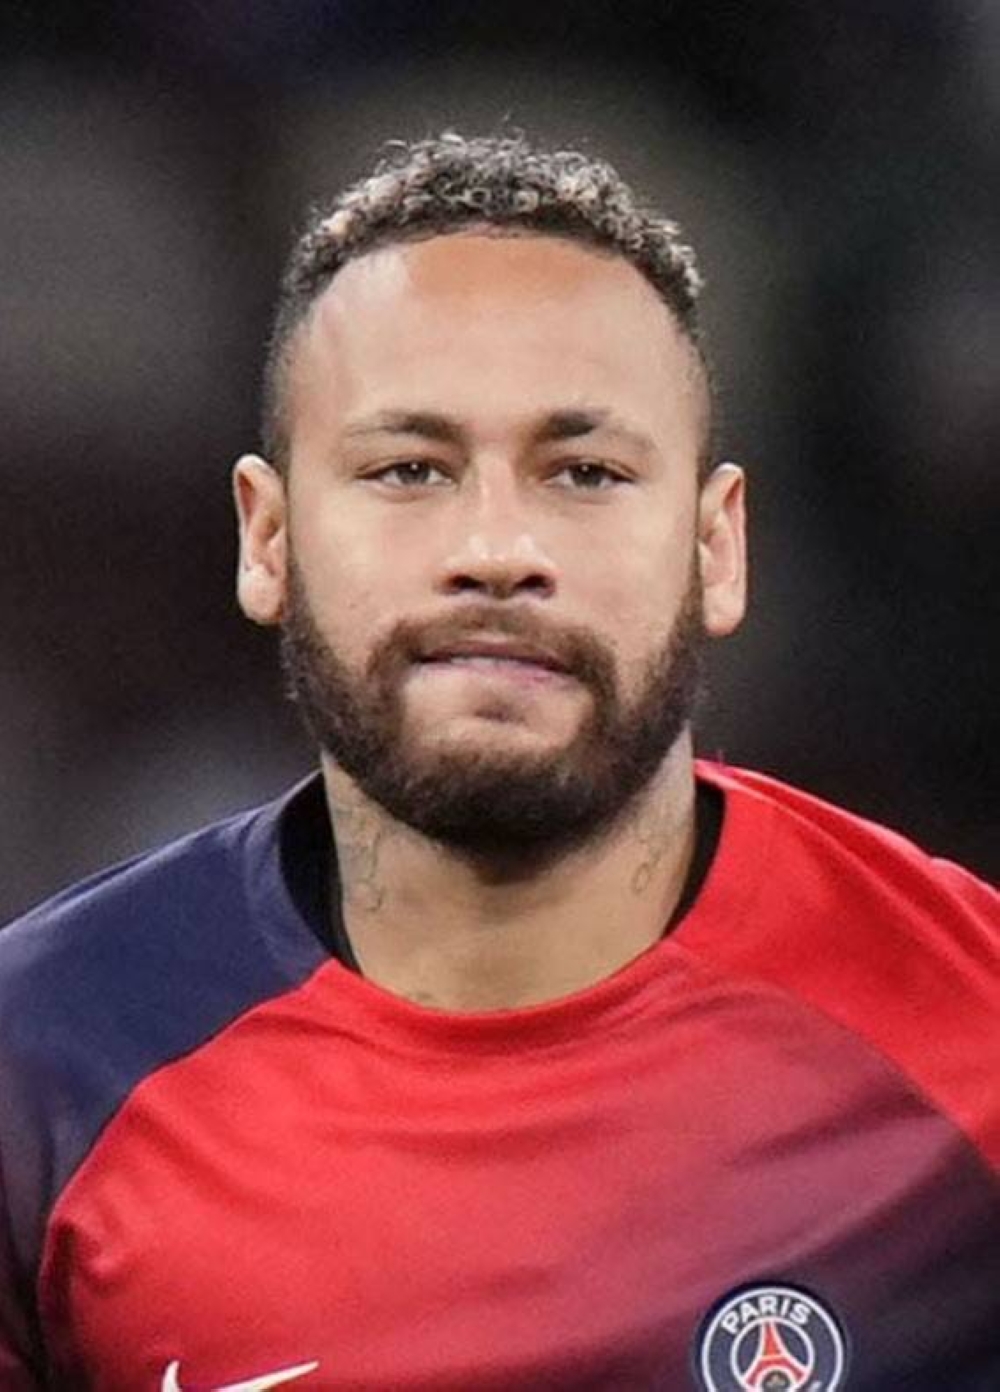 Neymar looks forward to facing 'top quality' opposition in Saudi Pro League  | Arab News